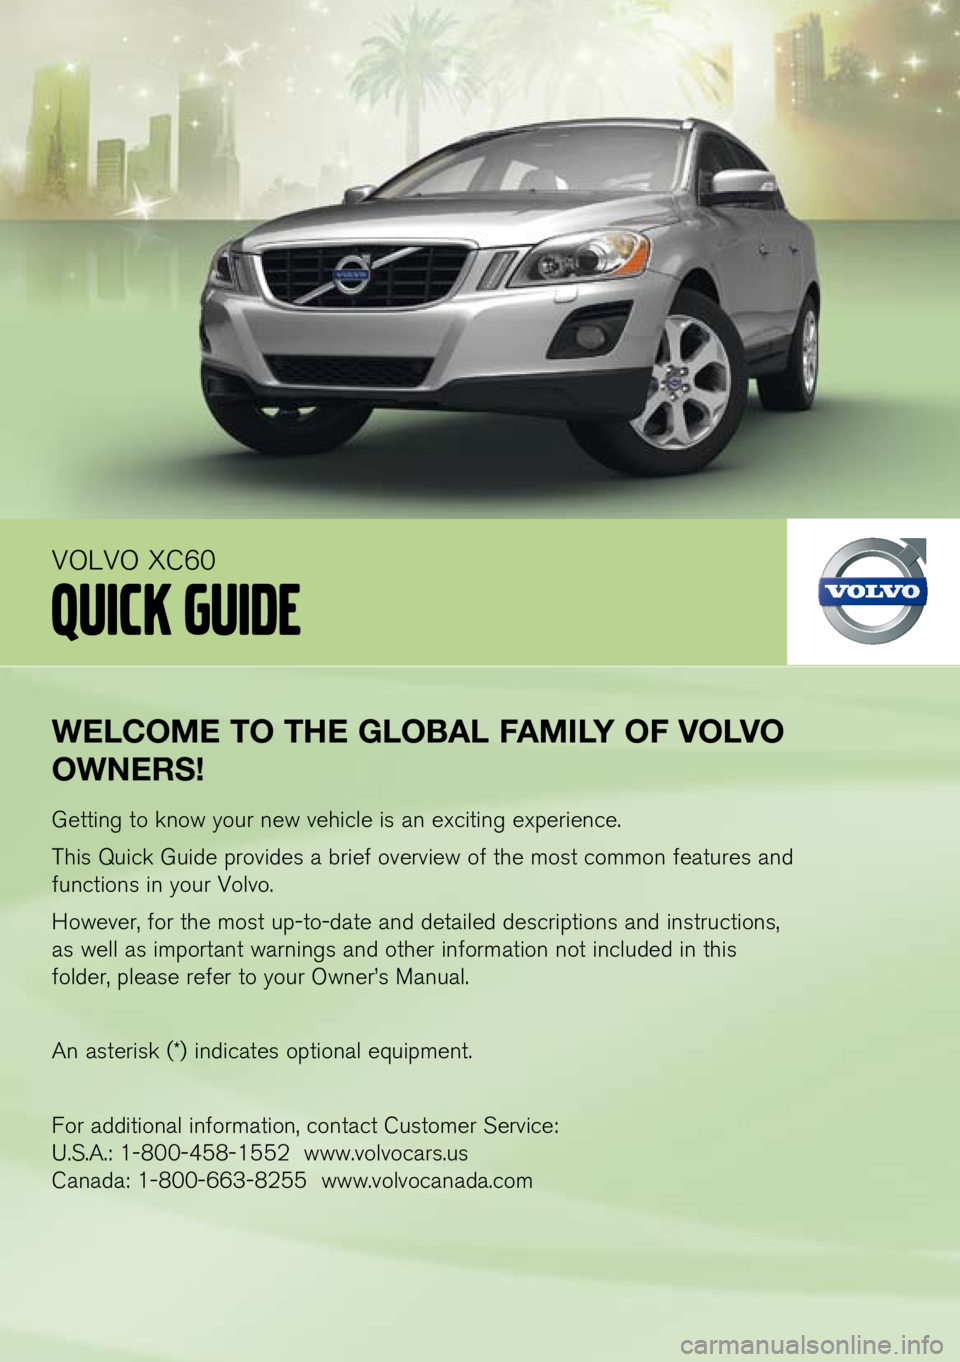 VOLVO XC60 2011  Quick Guide 
weLcome  to the  gLo BaL  fami Ly  of  voLvo 
owners !
Getting to know your new vehicle is an exciting experience.
This Quick Guide provides a brief overview of the most common features and 
function